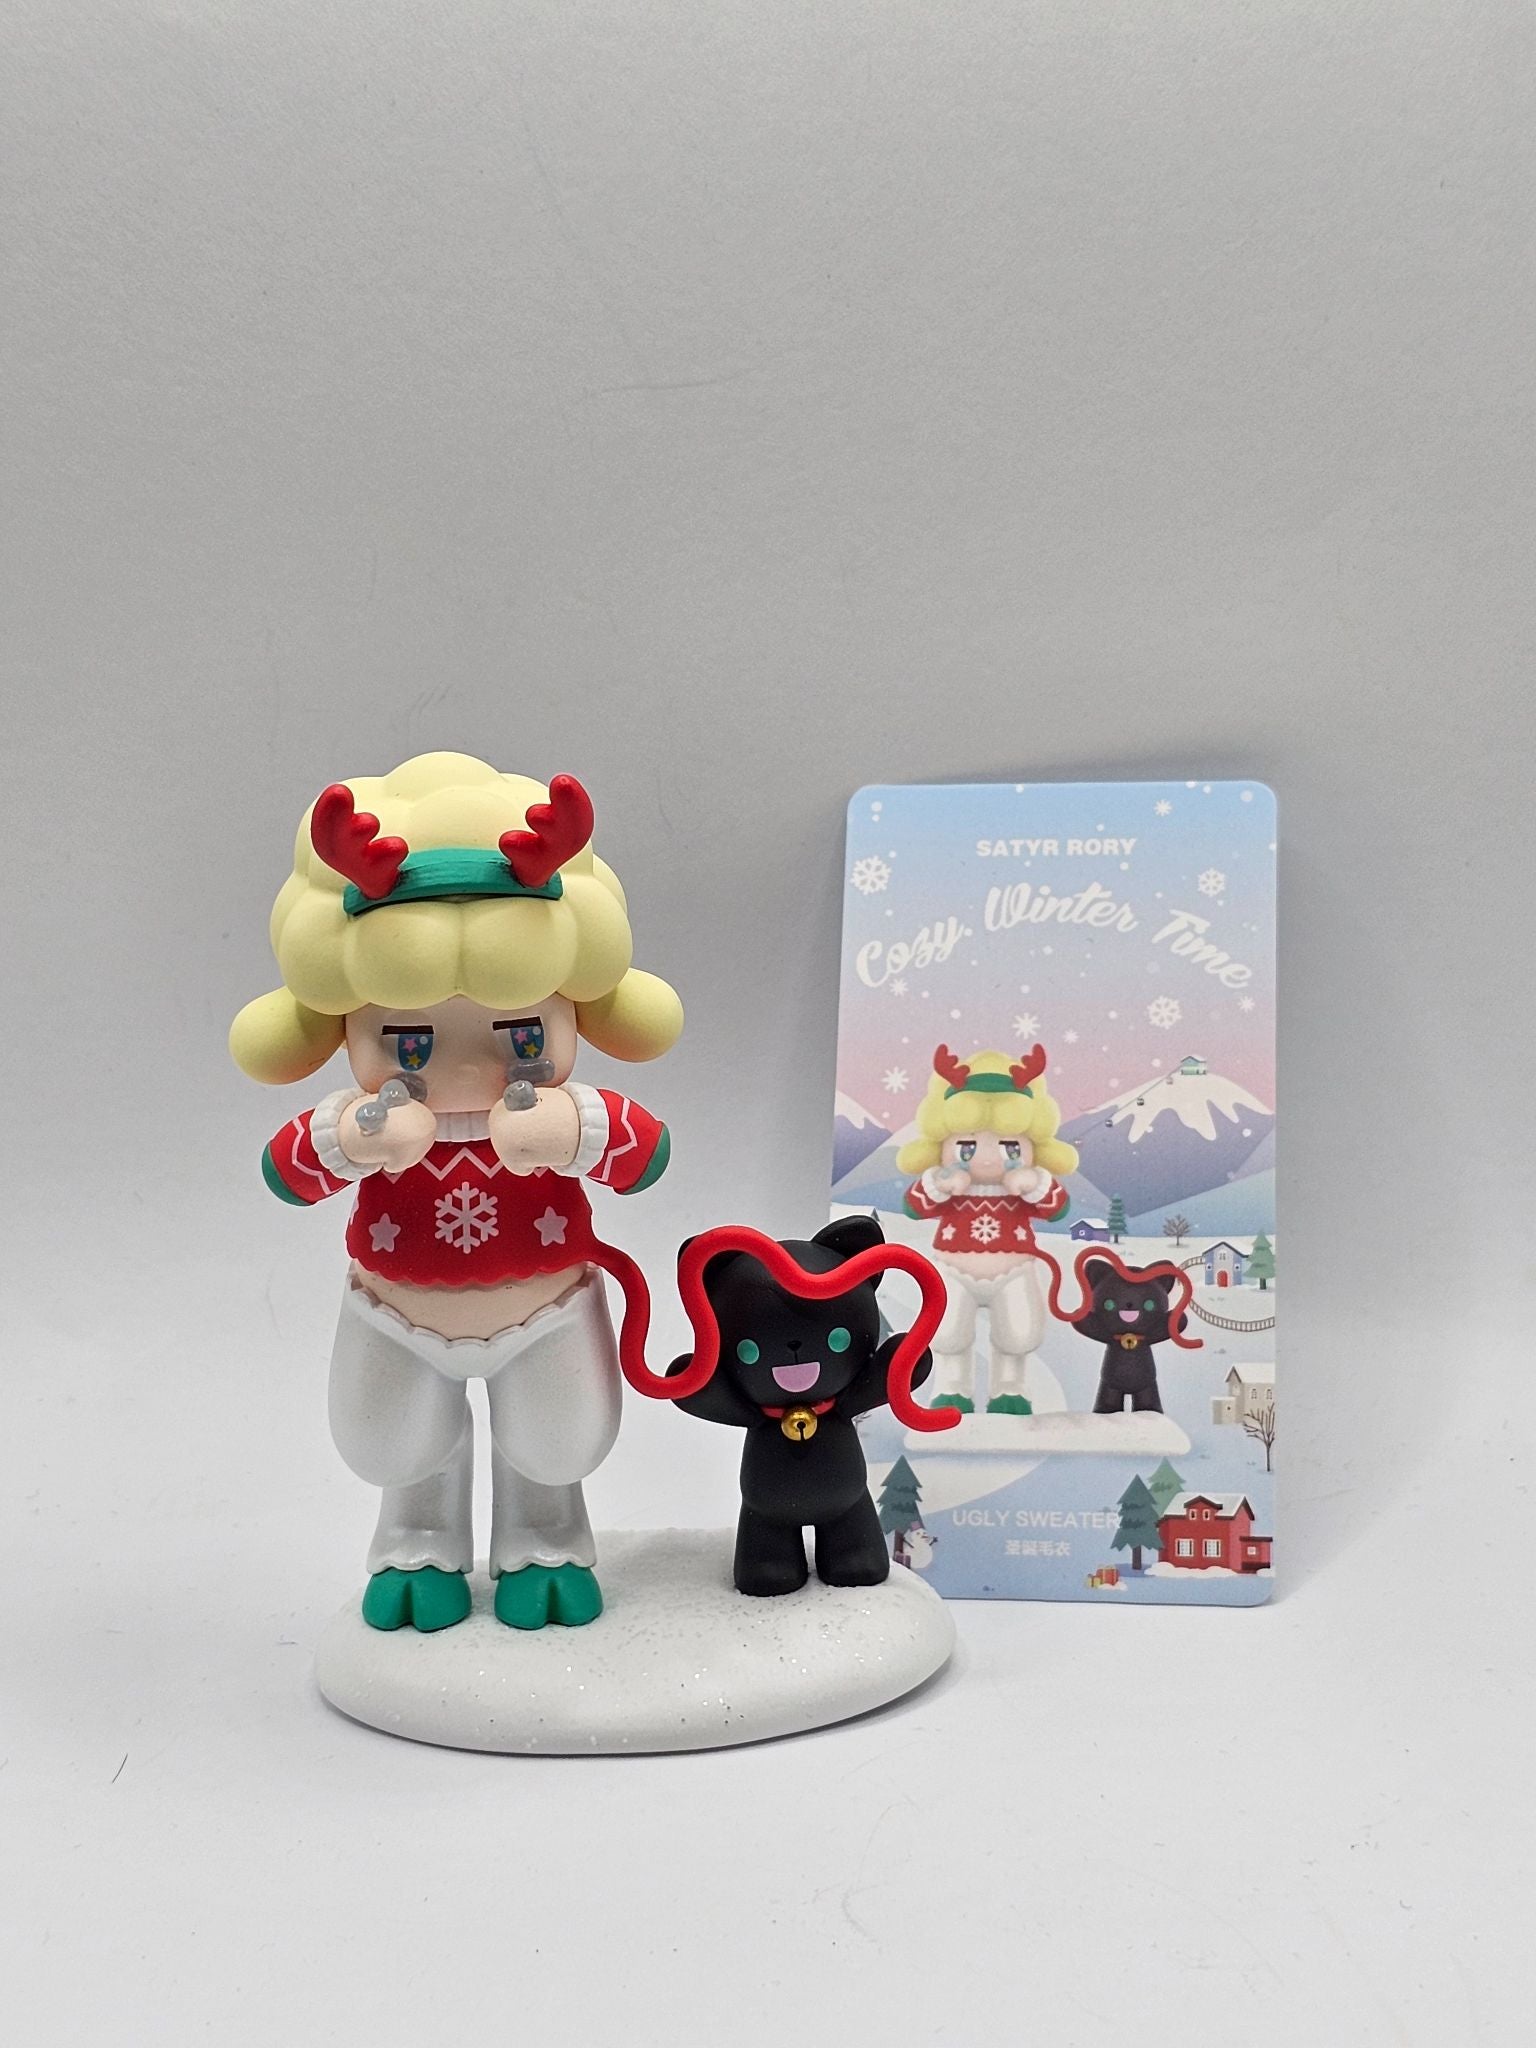 Ugly Sweater - Satyr Rory Cozy Winter Time Blind Box Series - Popmart - 1